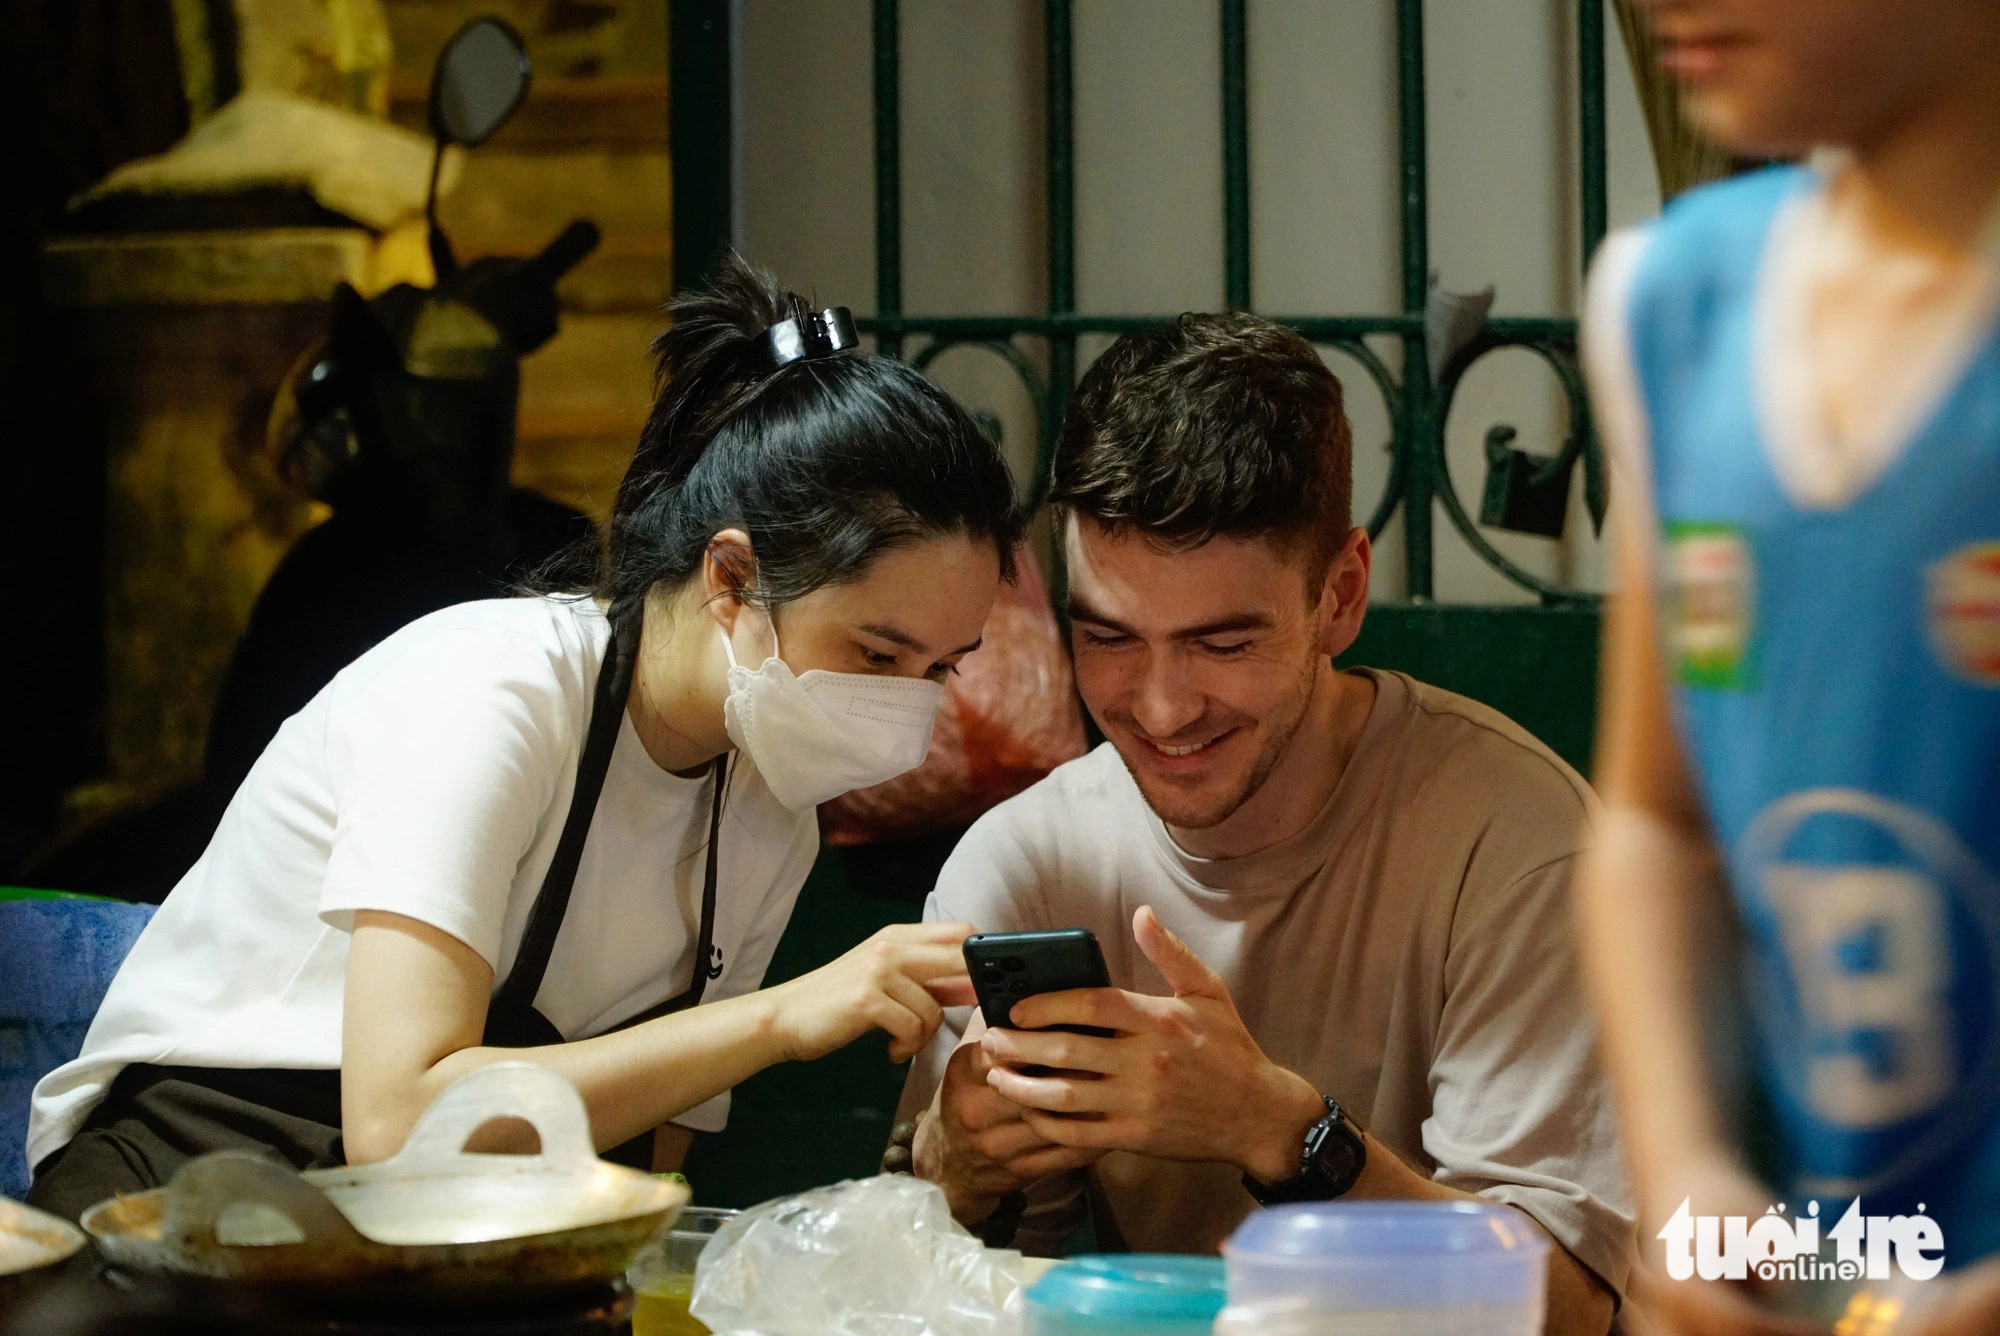 Moritz, a 28-year-old Swiss man, and his girlfriend, Le Duyen, watch a smartphone together at her eatery on Phan Dinh Phung Street in Hanoi. Photo: Nguyen Hien / Tuoi Tre